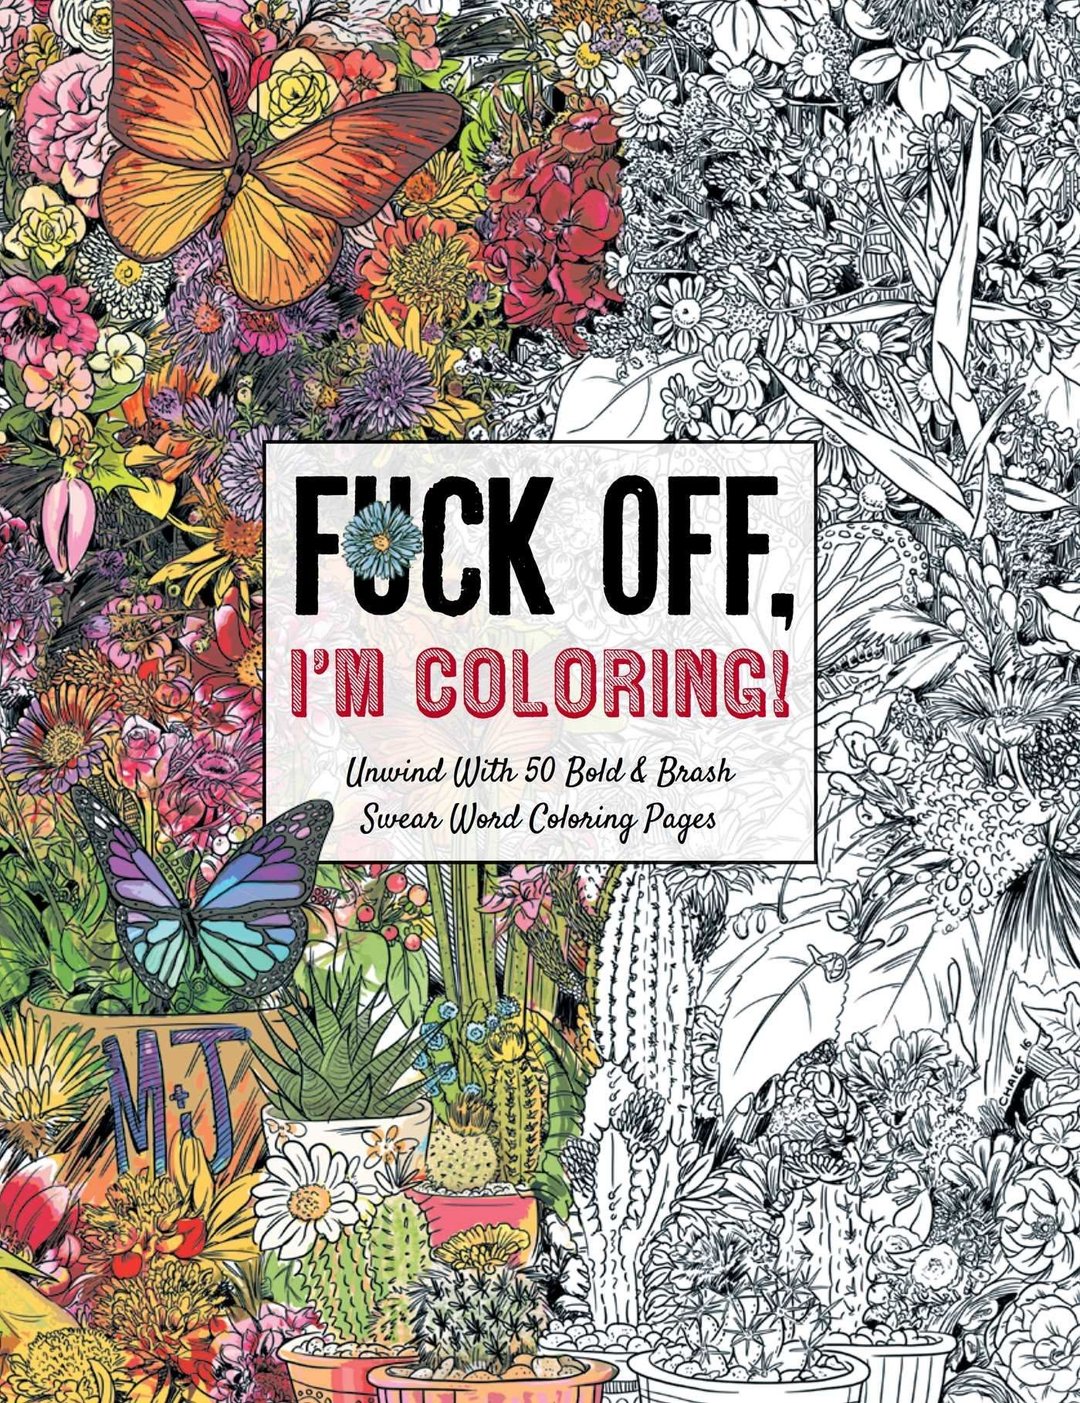 Galentine's Day Gift - F*ck off I’m colouring! Adult Colouring Book Galentine's Day Gift